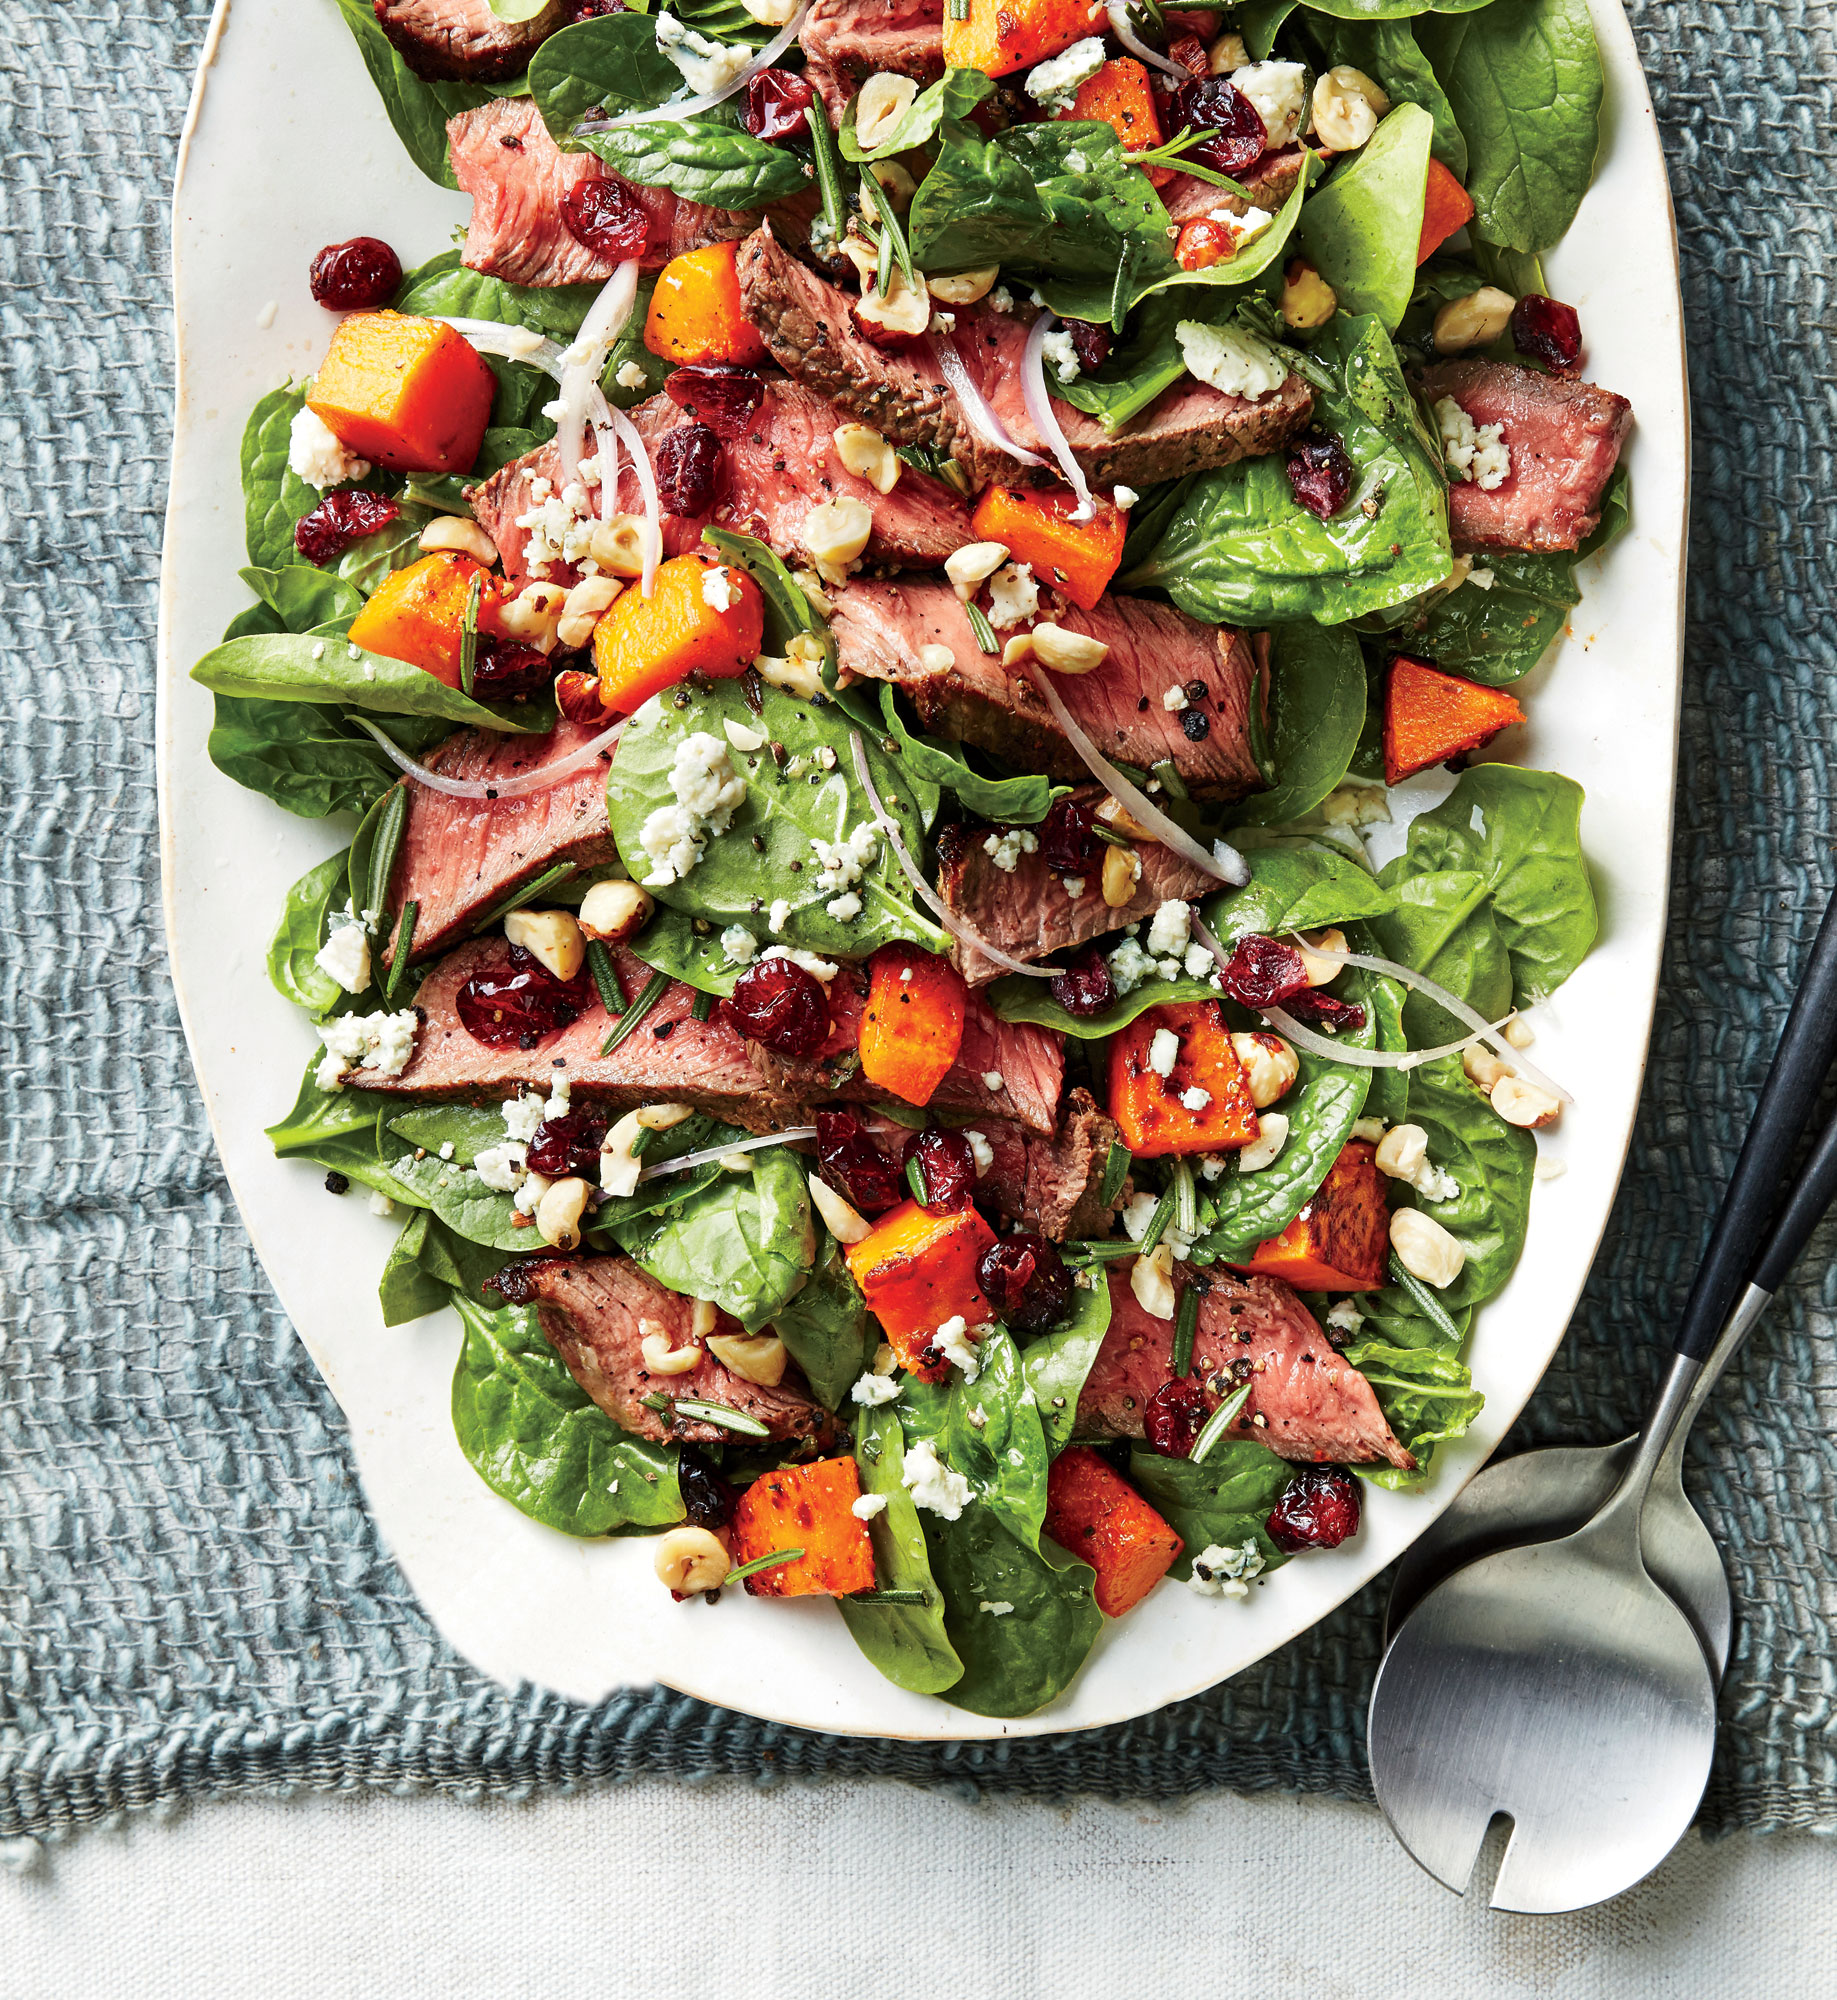 ck-Steak Salad with Butternut Squash and Cranberries